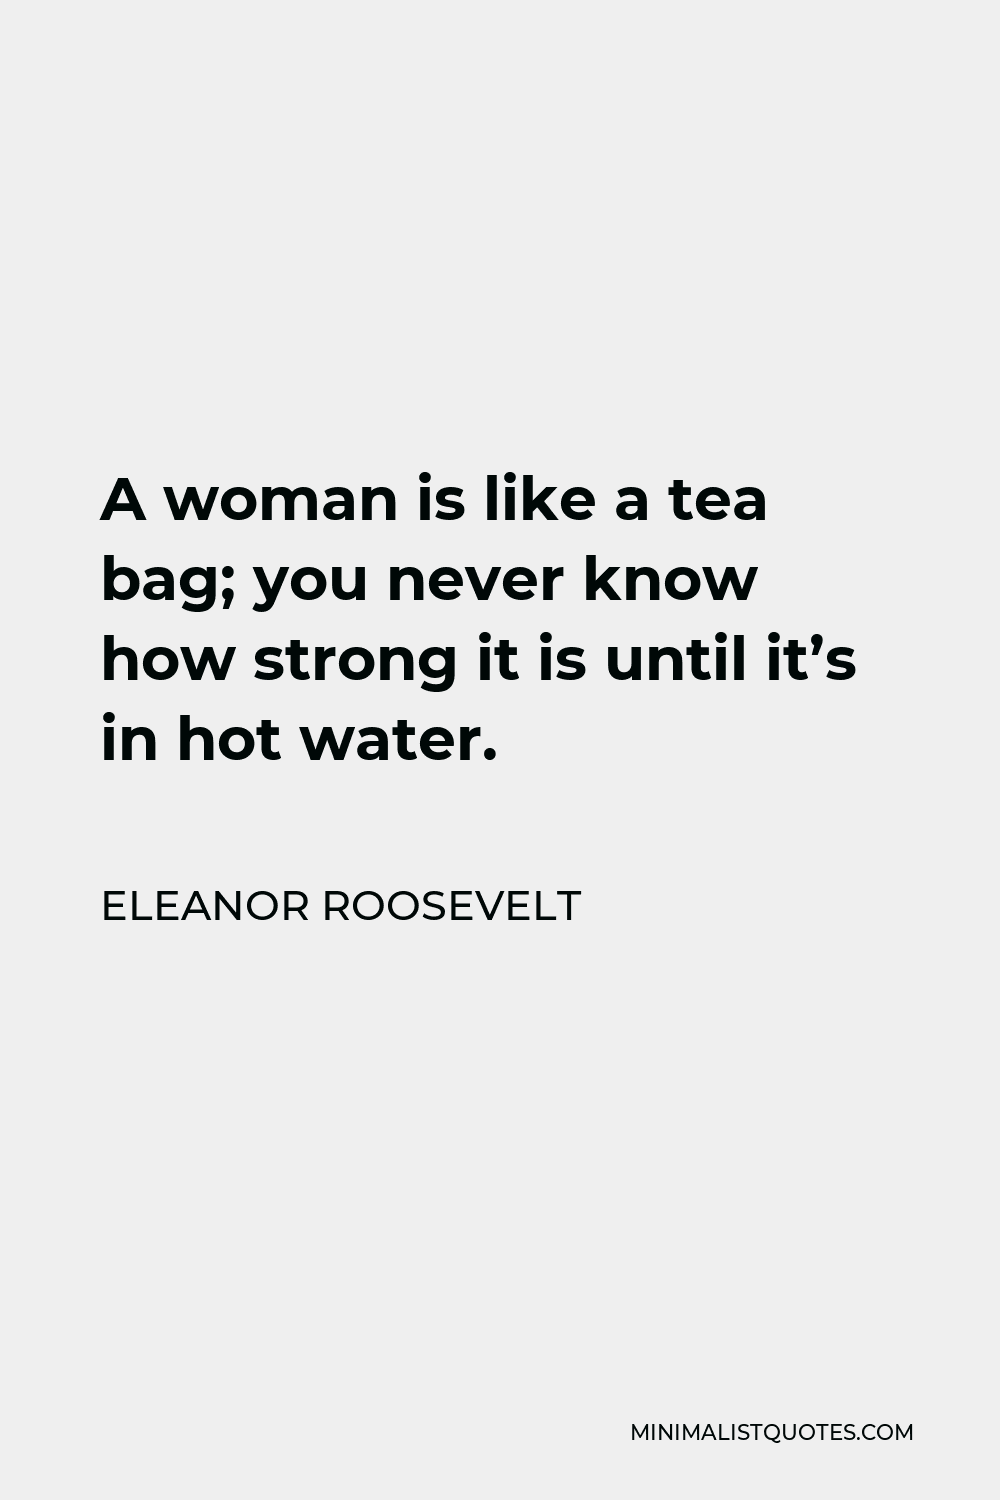 Eleanor Roosevelt Quote - A woman is like a tea bag; you never know how strong it is until it’s in hot water.